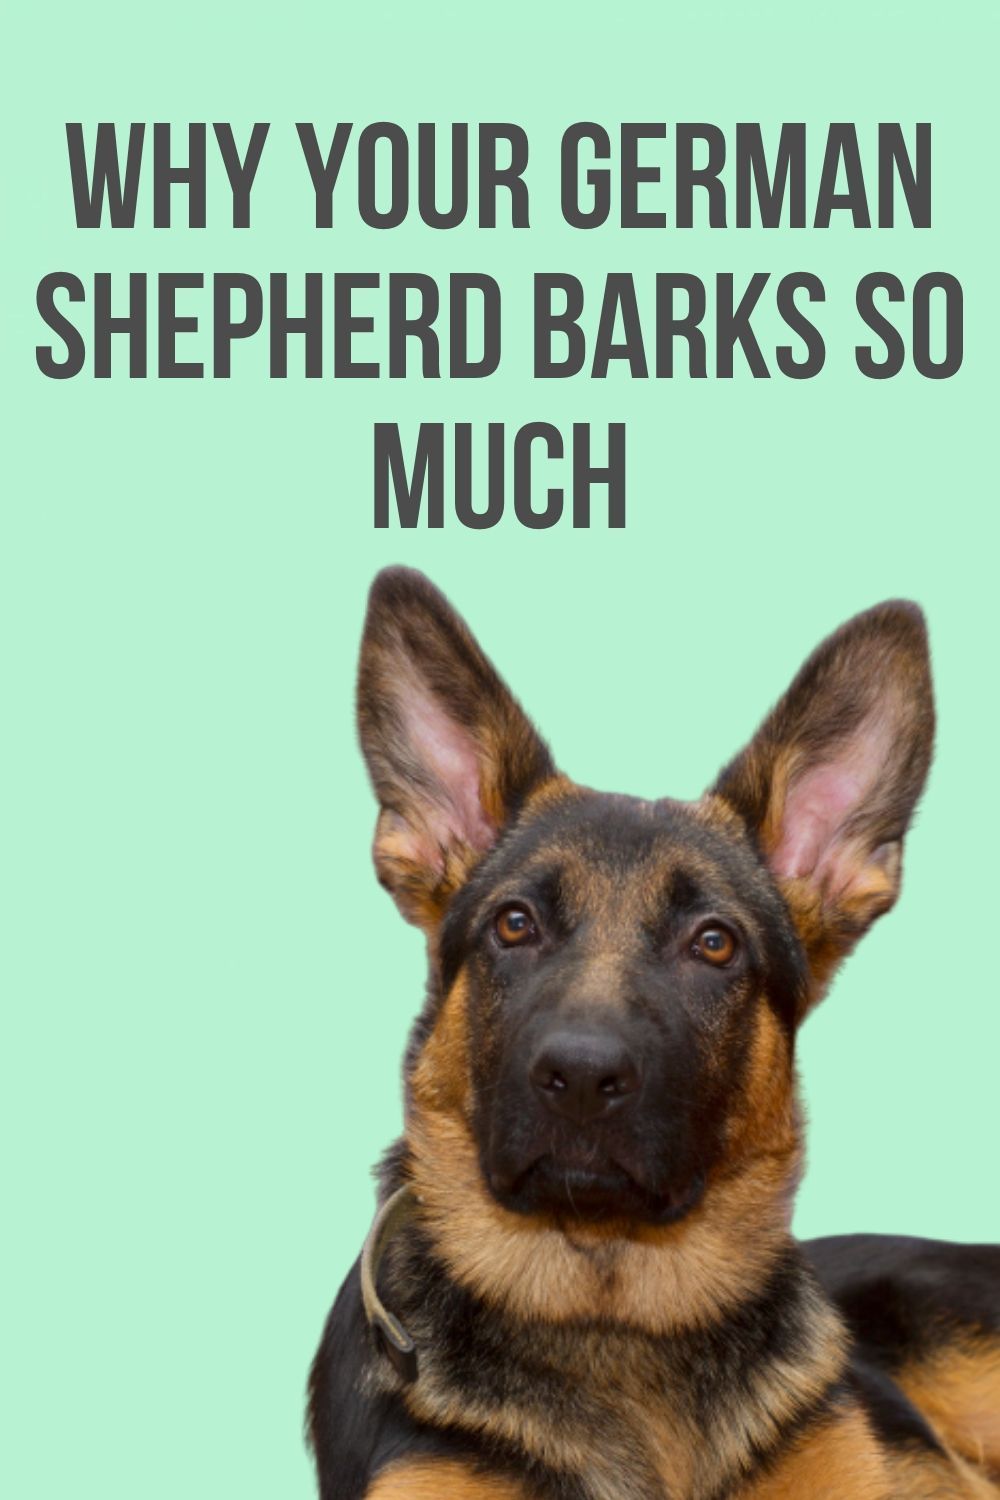 Why your GSD barks so much in 2020